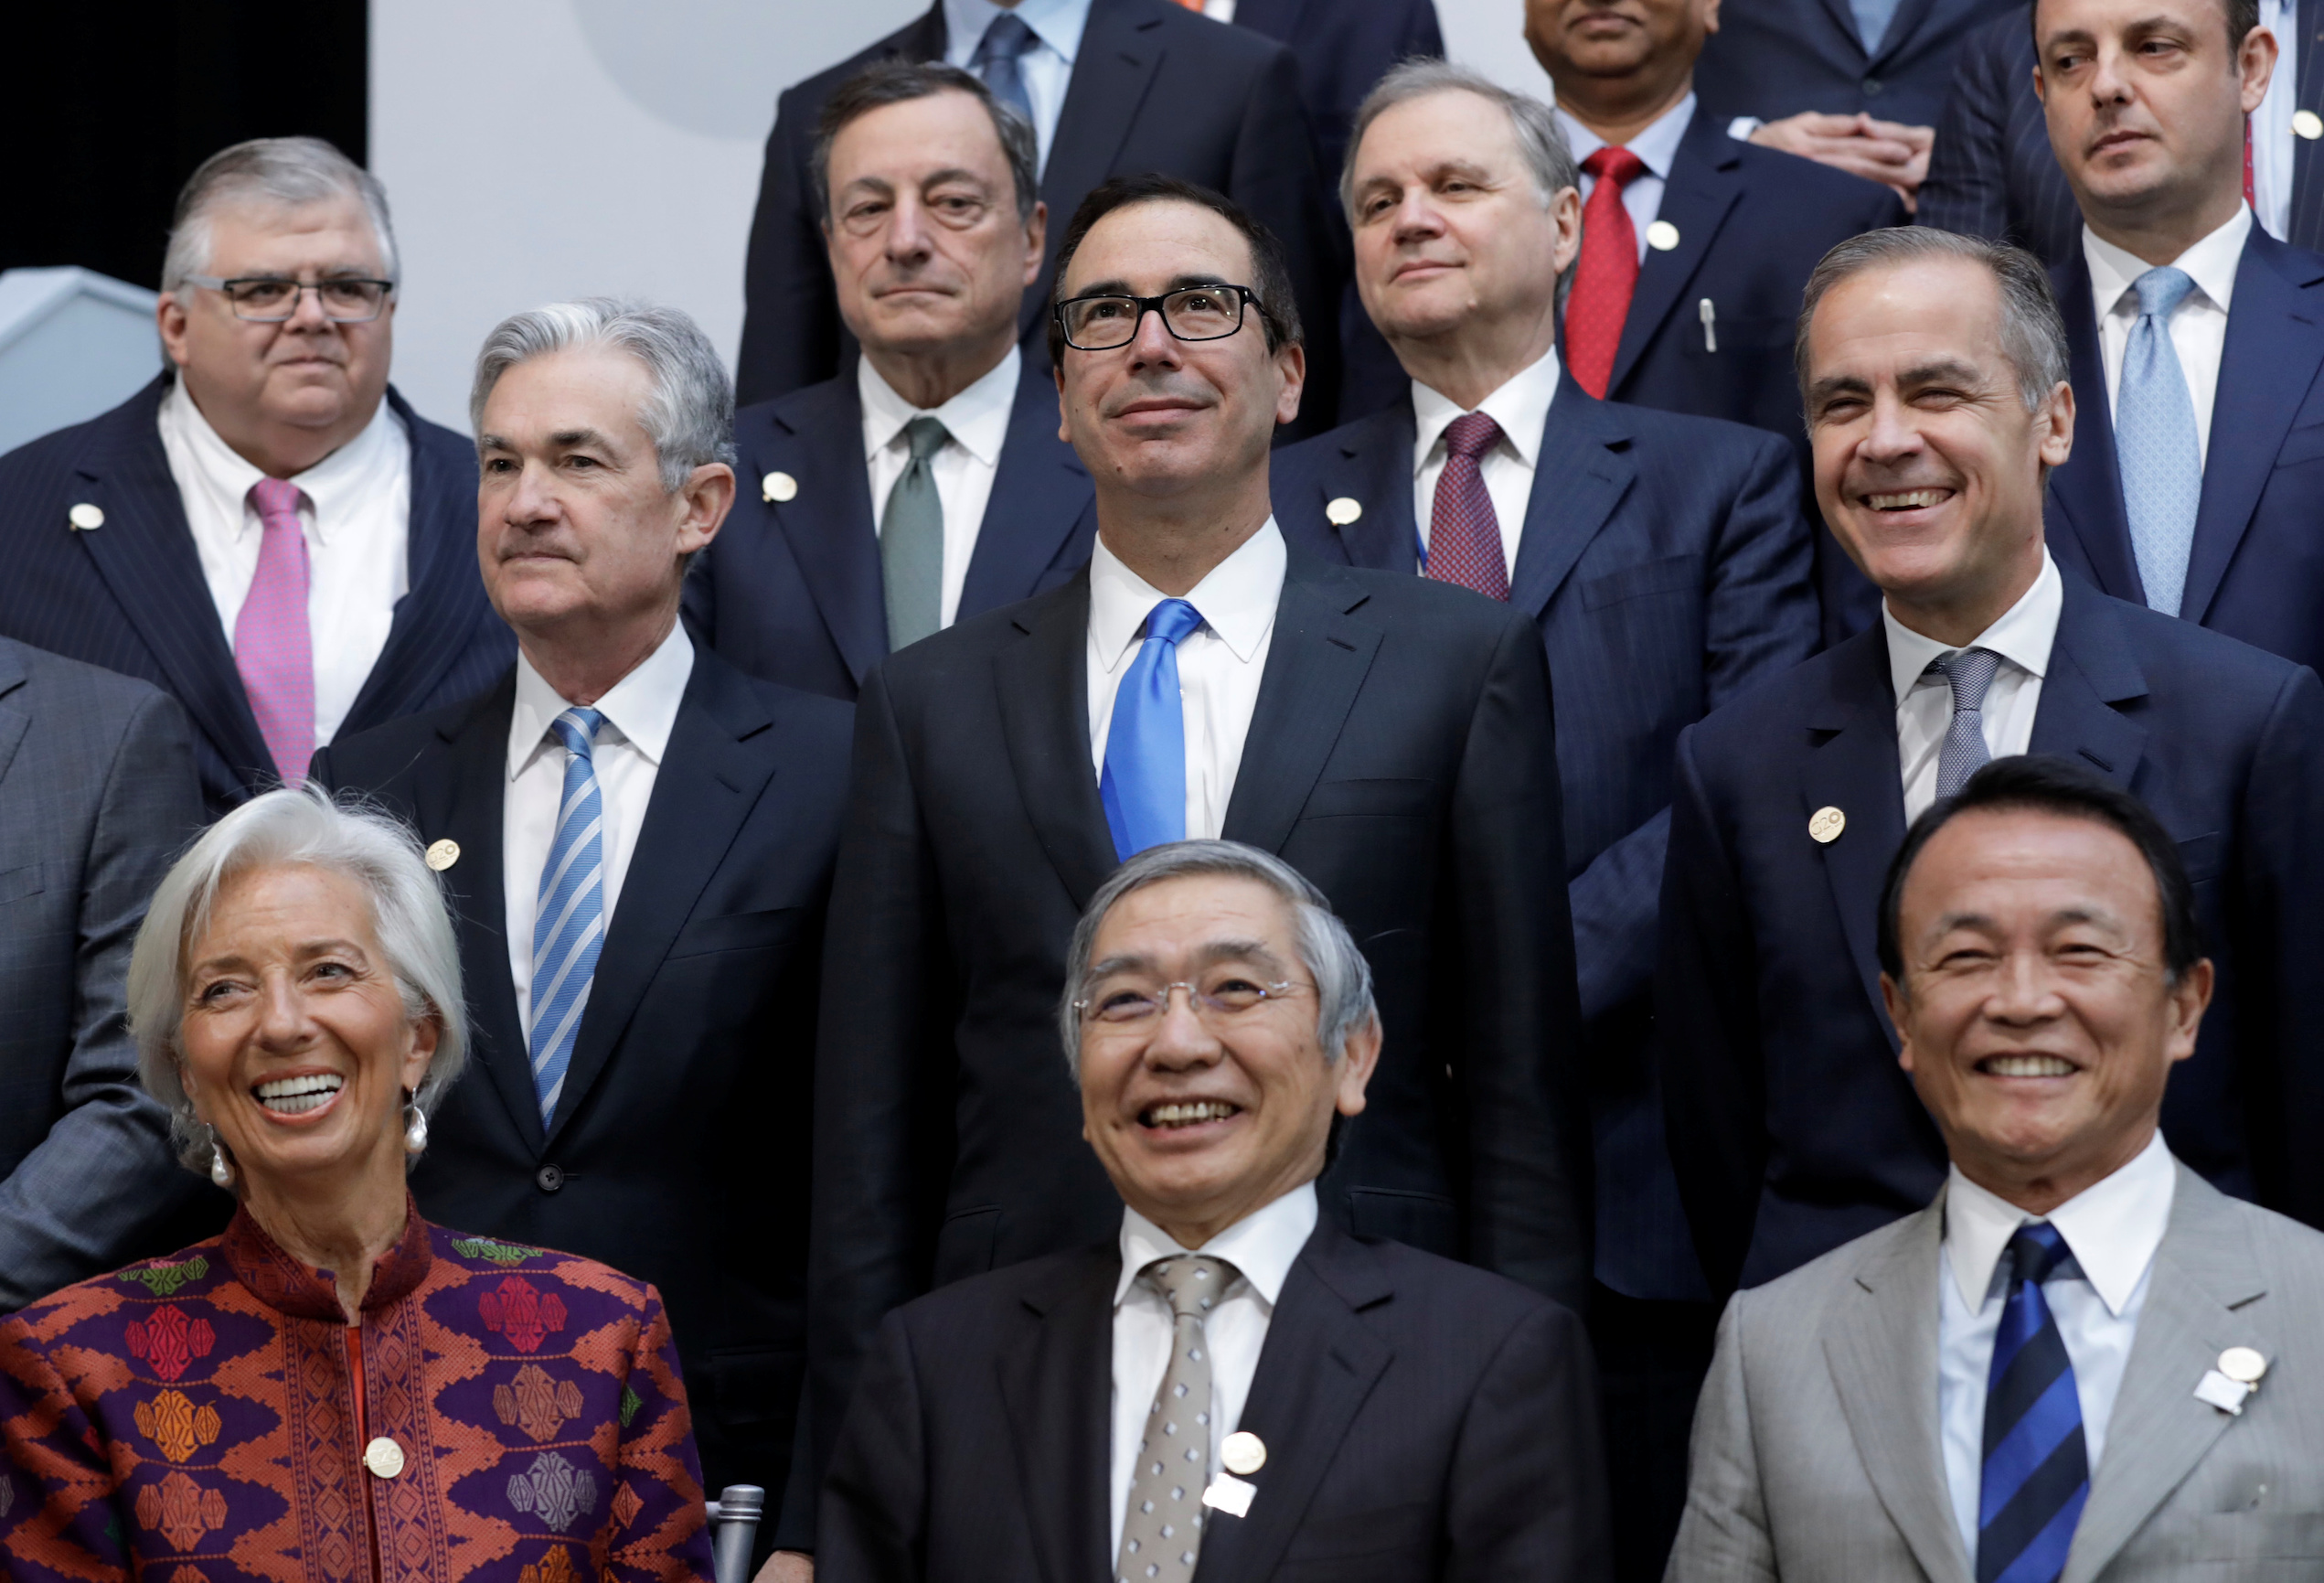 U.S. Treasury Secretary Steve Mnuchin (C) poses for G-20 finance ministers and central banks governors family photo during the IMF/World Bank spring meeting in Washington, U.S., April 20, 2018. REUTERS/Yuri Gripas - RC14DAD6E380